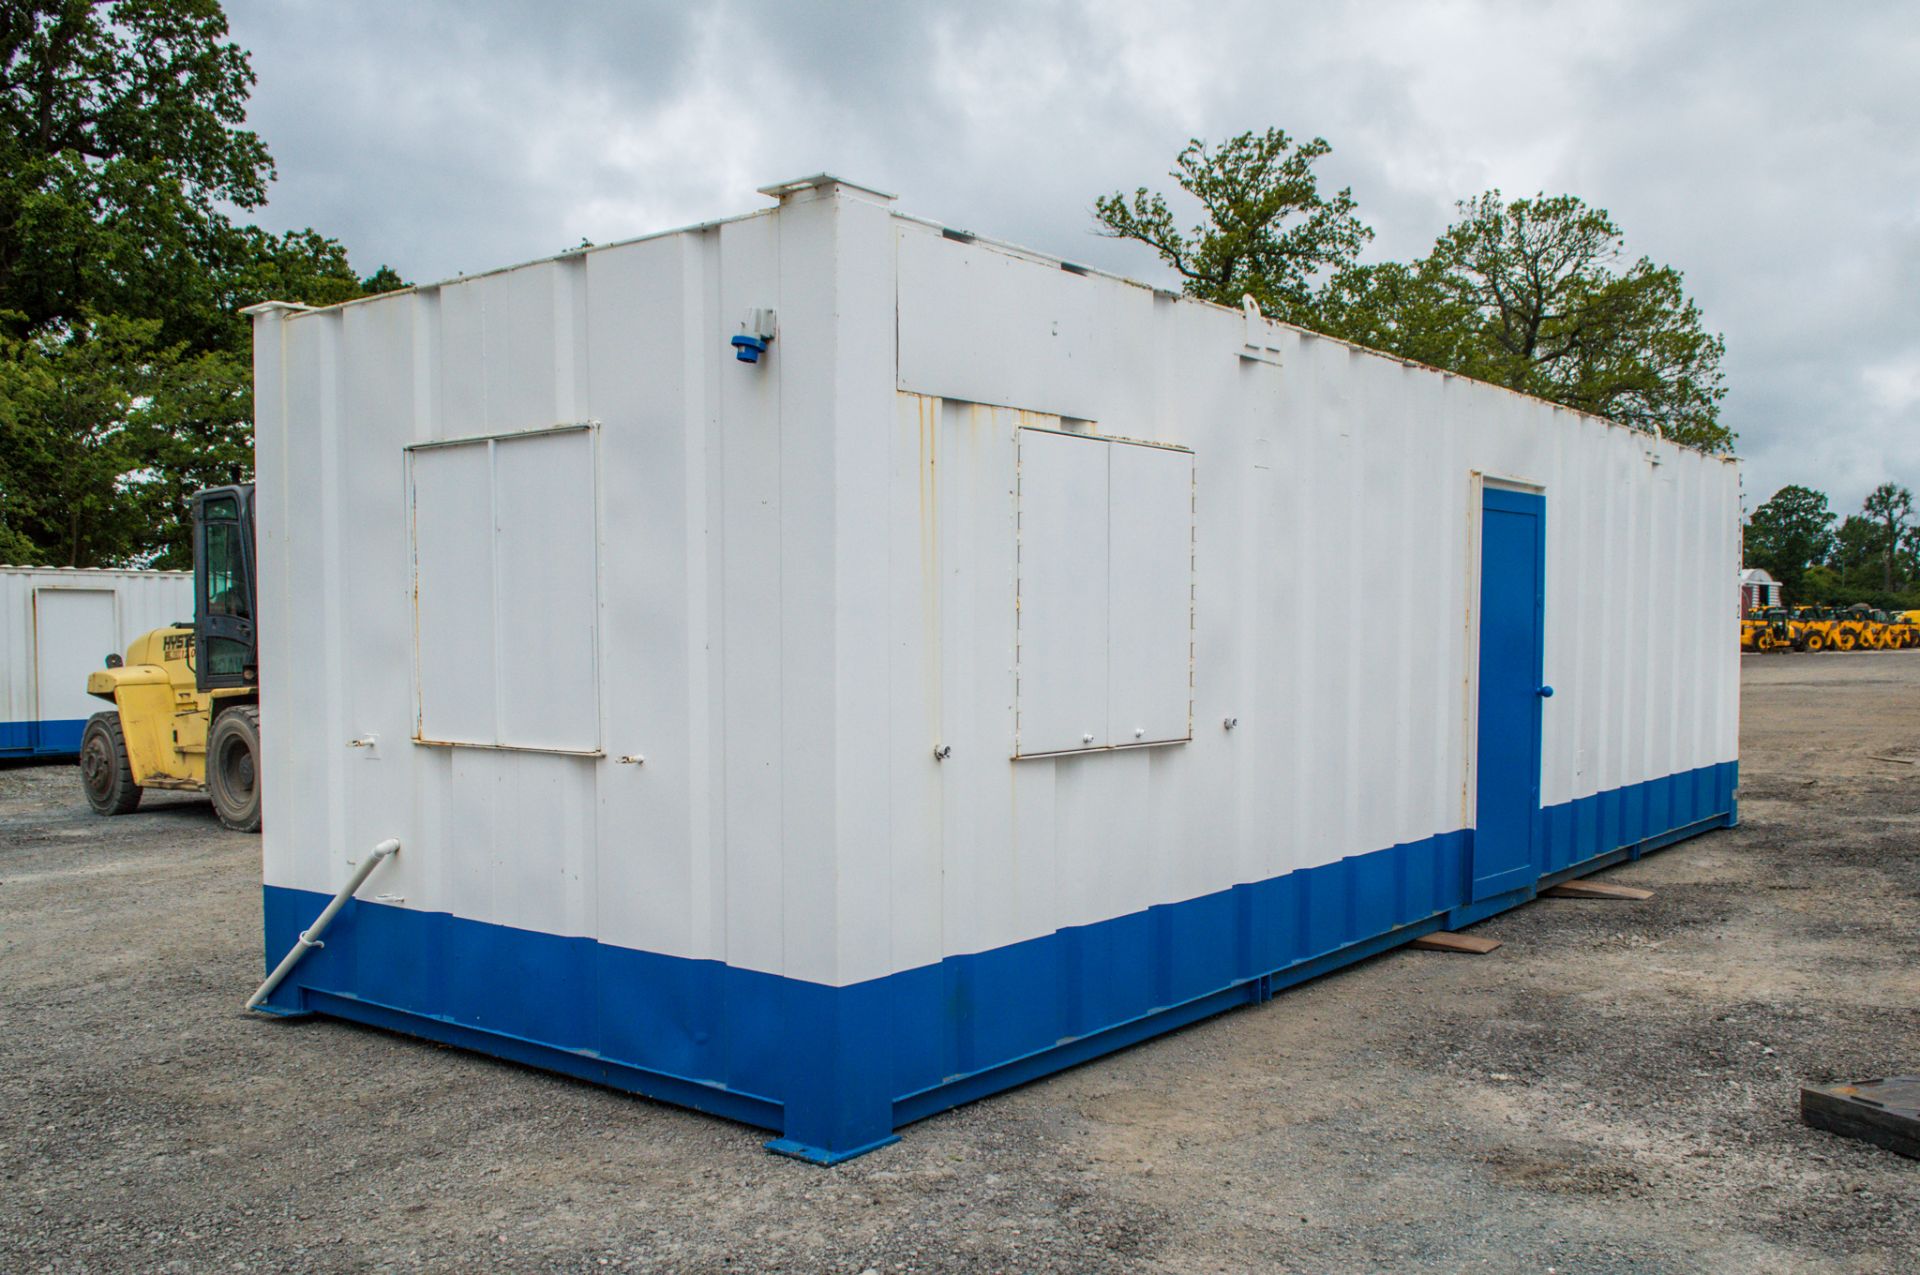 32ft x 10ft steel anti office site unit ** No keys but the doors are unlocked ** GT30212 - Image 3 of 6